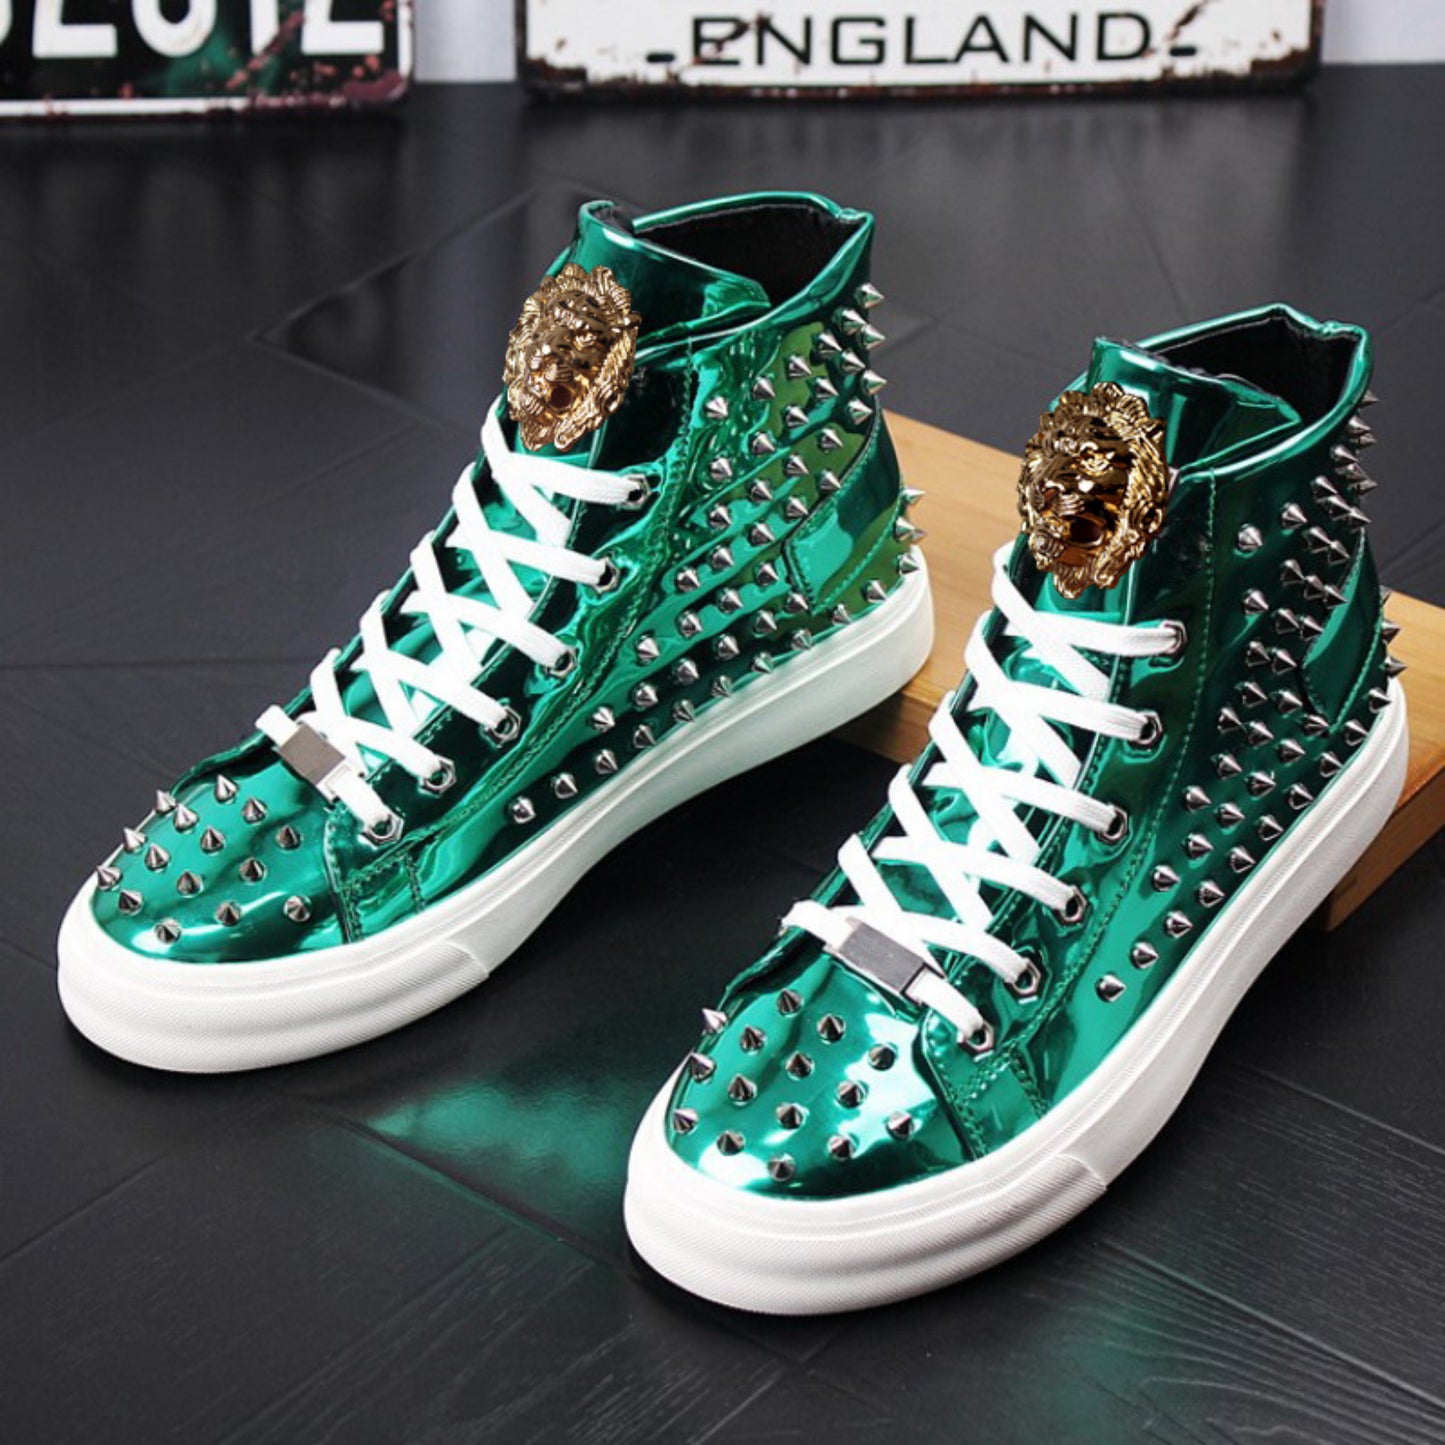 Punk Style Studded Metallic High-Top Boots Sneakers for Women | ULZZANG BELLA